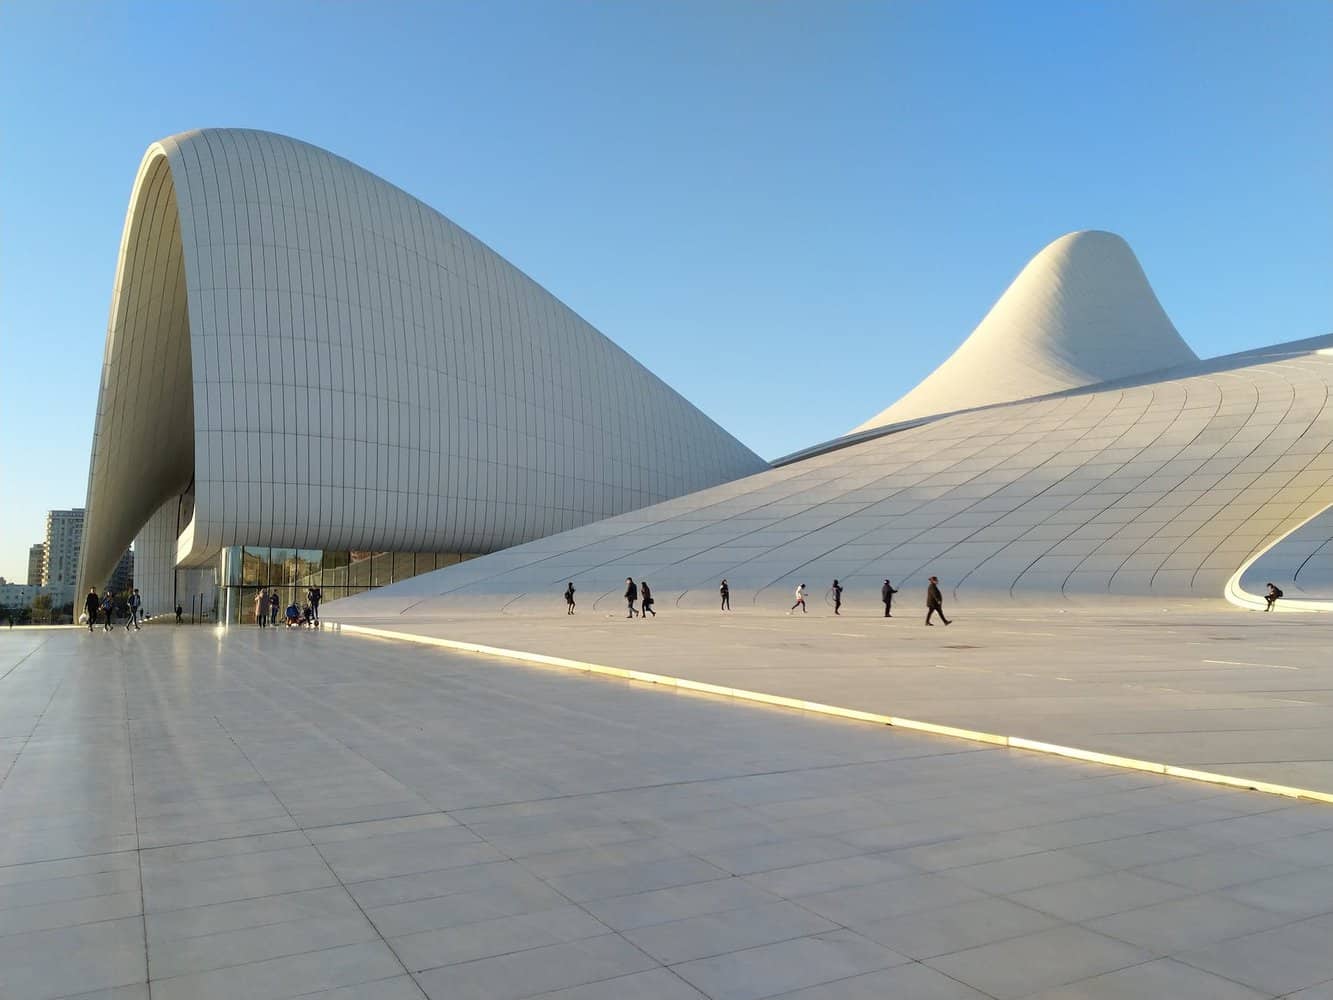 photo of people walking near building designed by zarhar hadid, a found architecture. Giant white slopes slip and slide forming a unique shape of buidling. Making BAKU oc